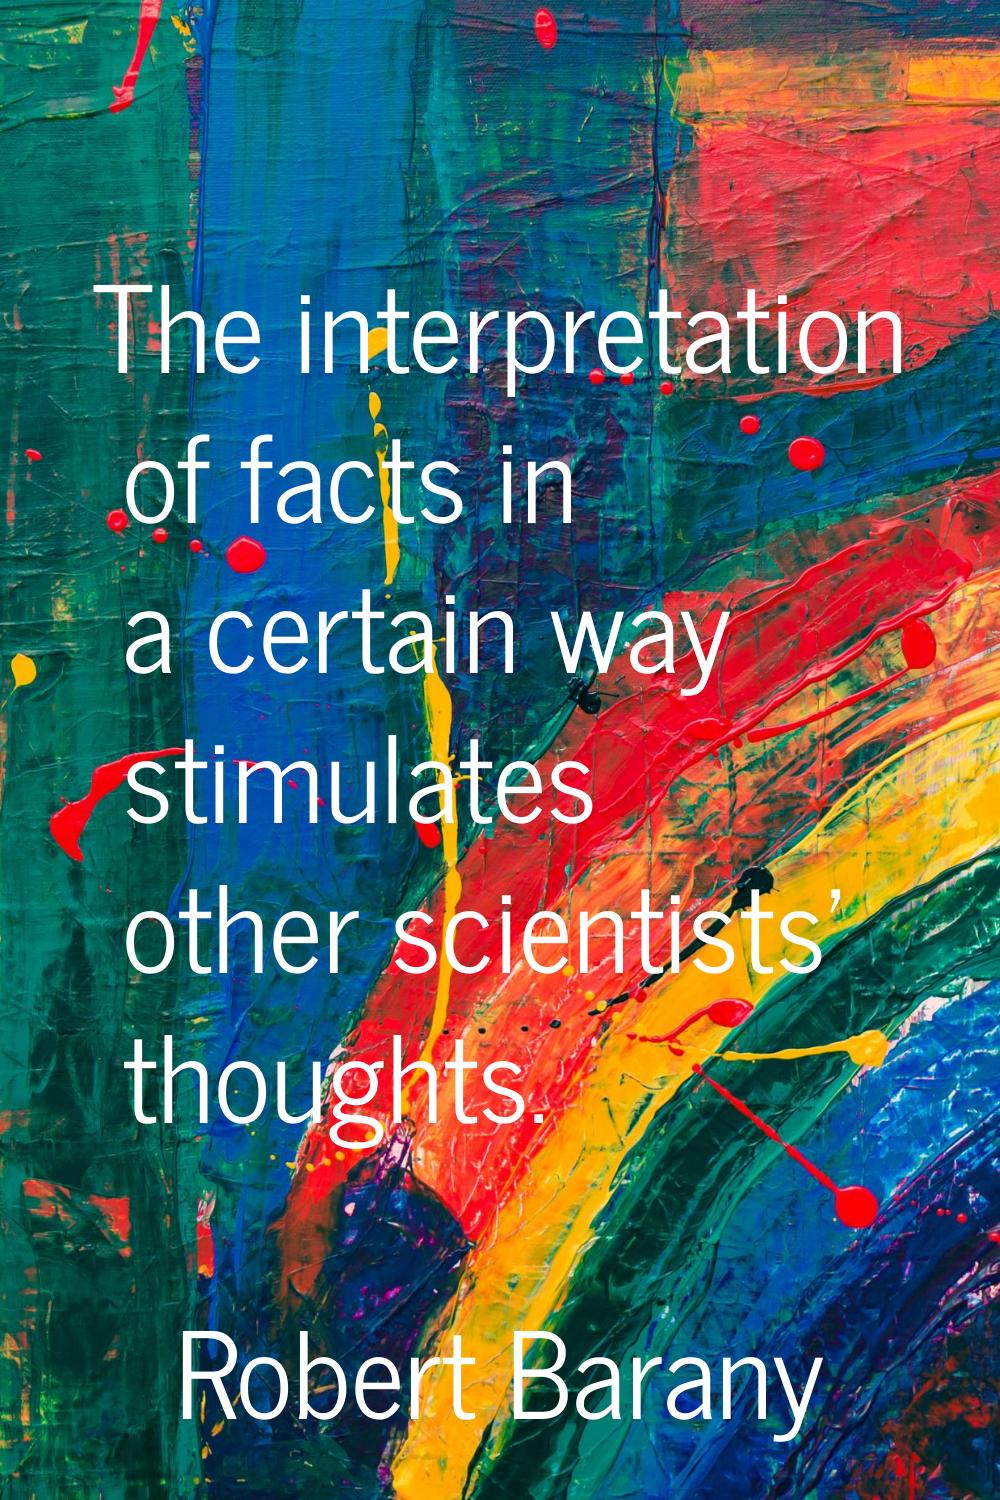 The interpretation of facts in a certain way stimulates other scientists' thoughts.